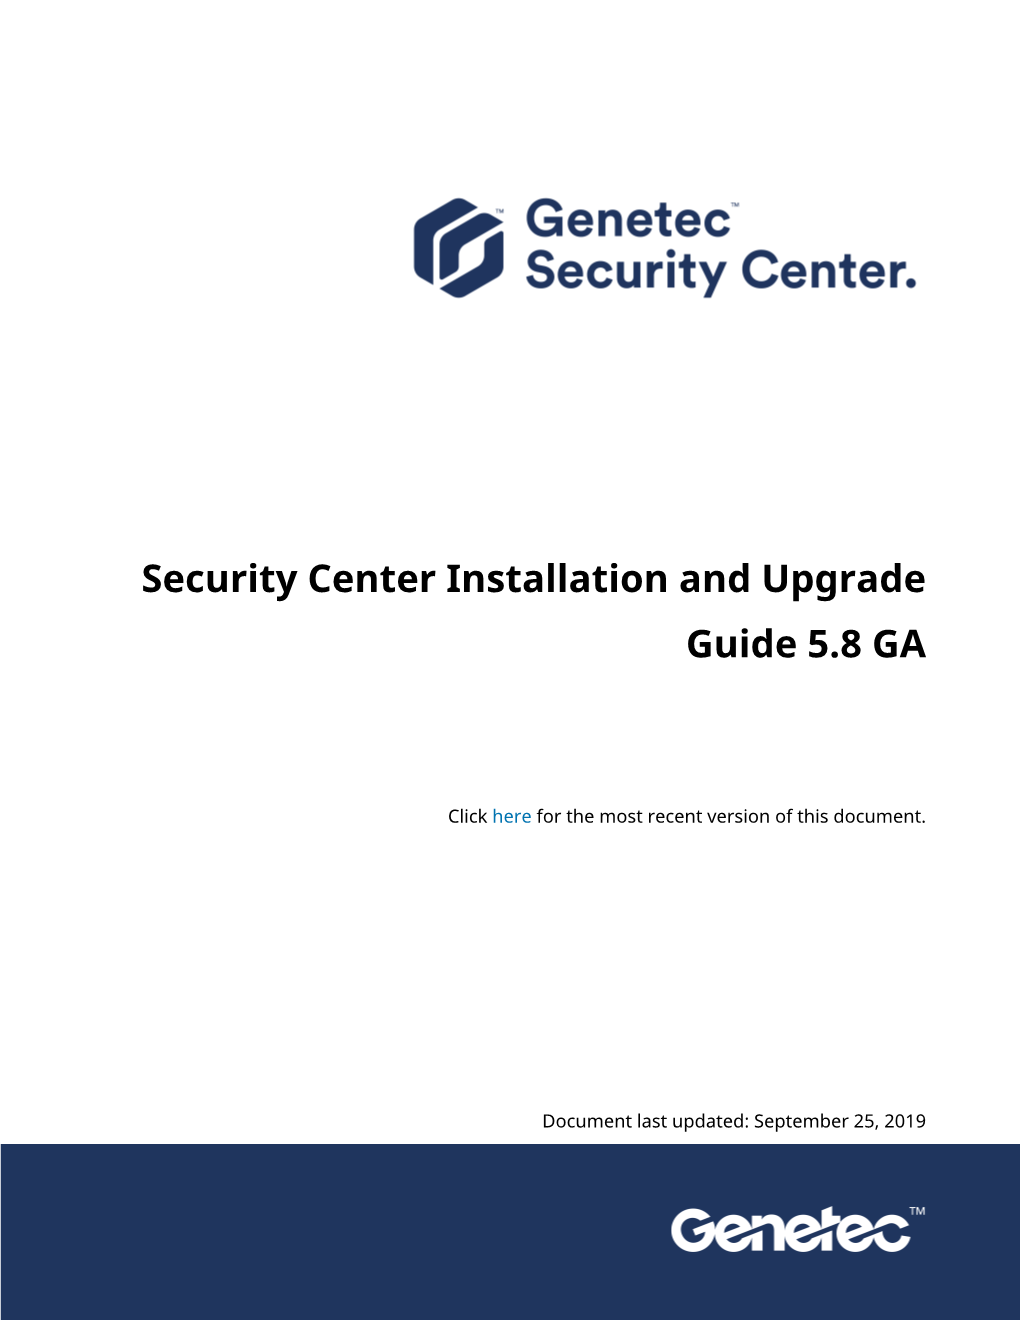 Security Center Installation and Upgrade Guide 5.8 GA